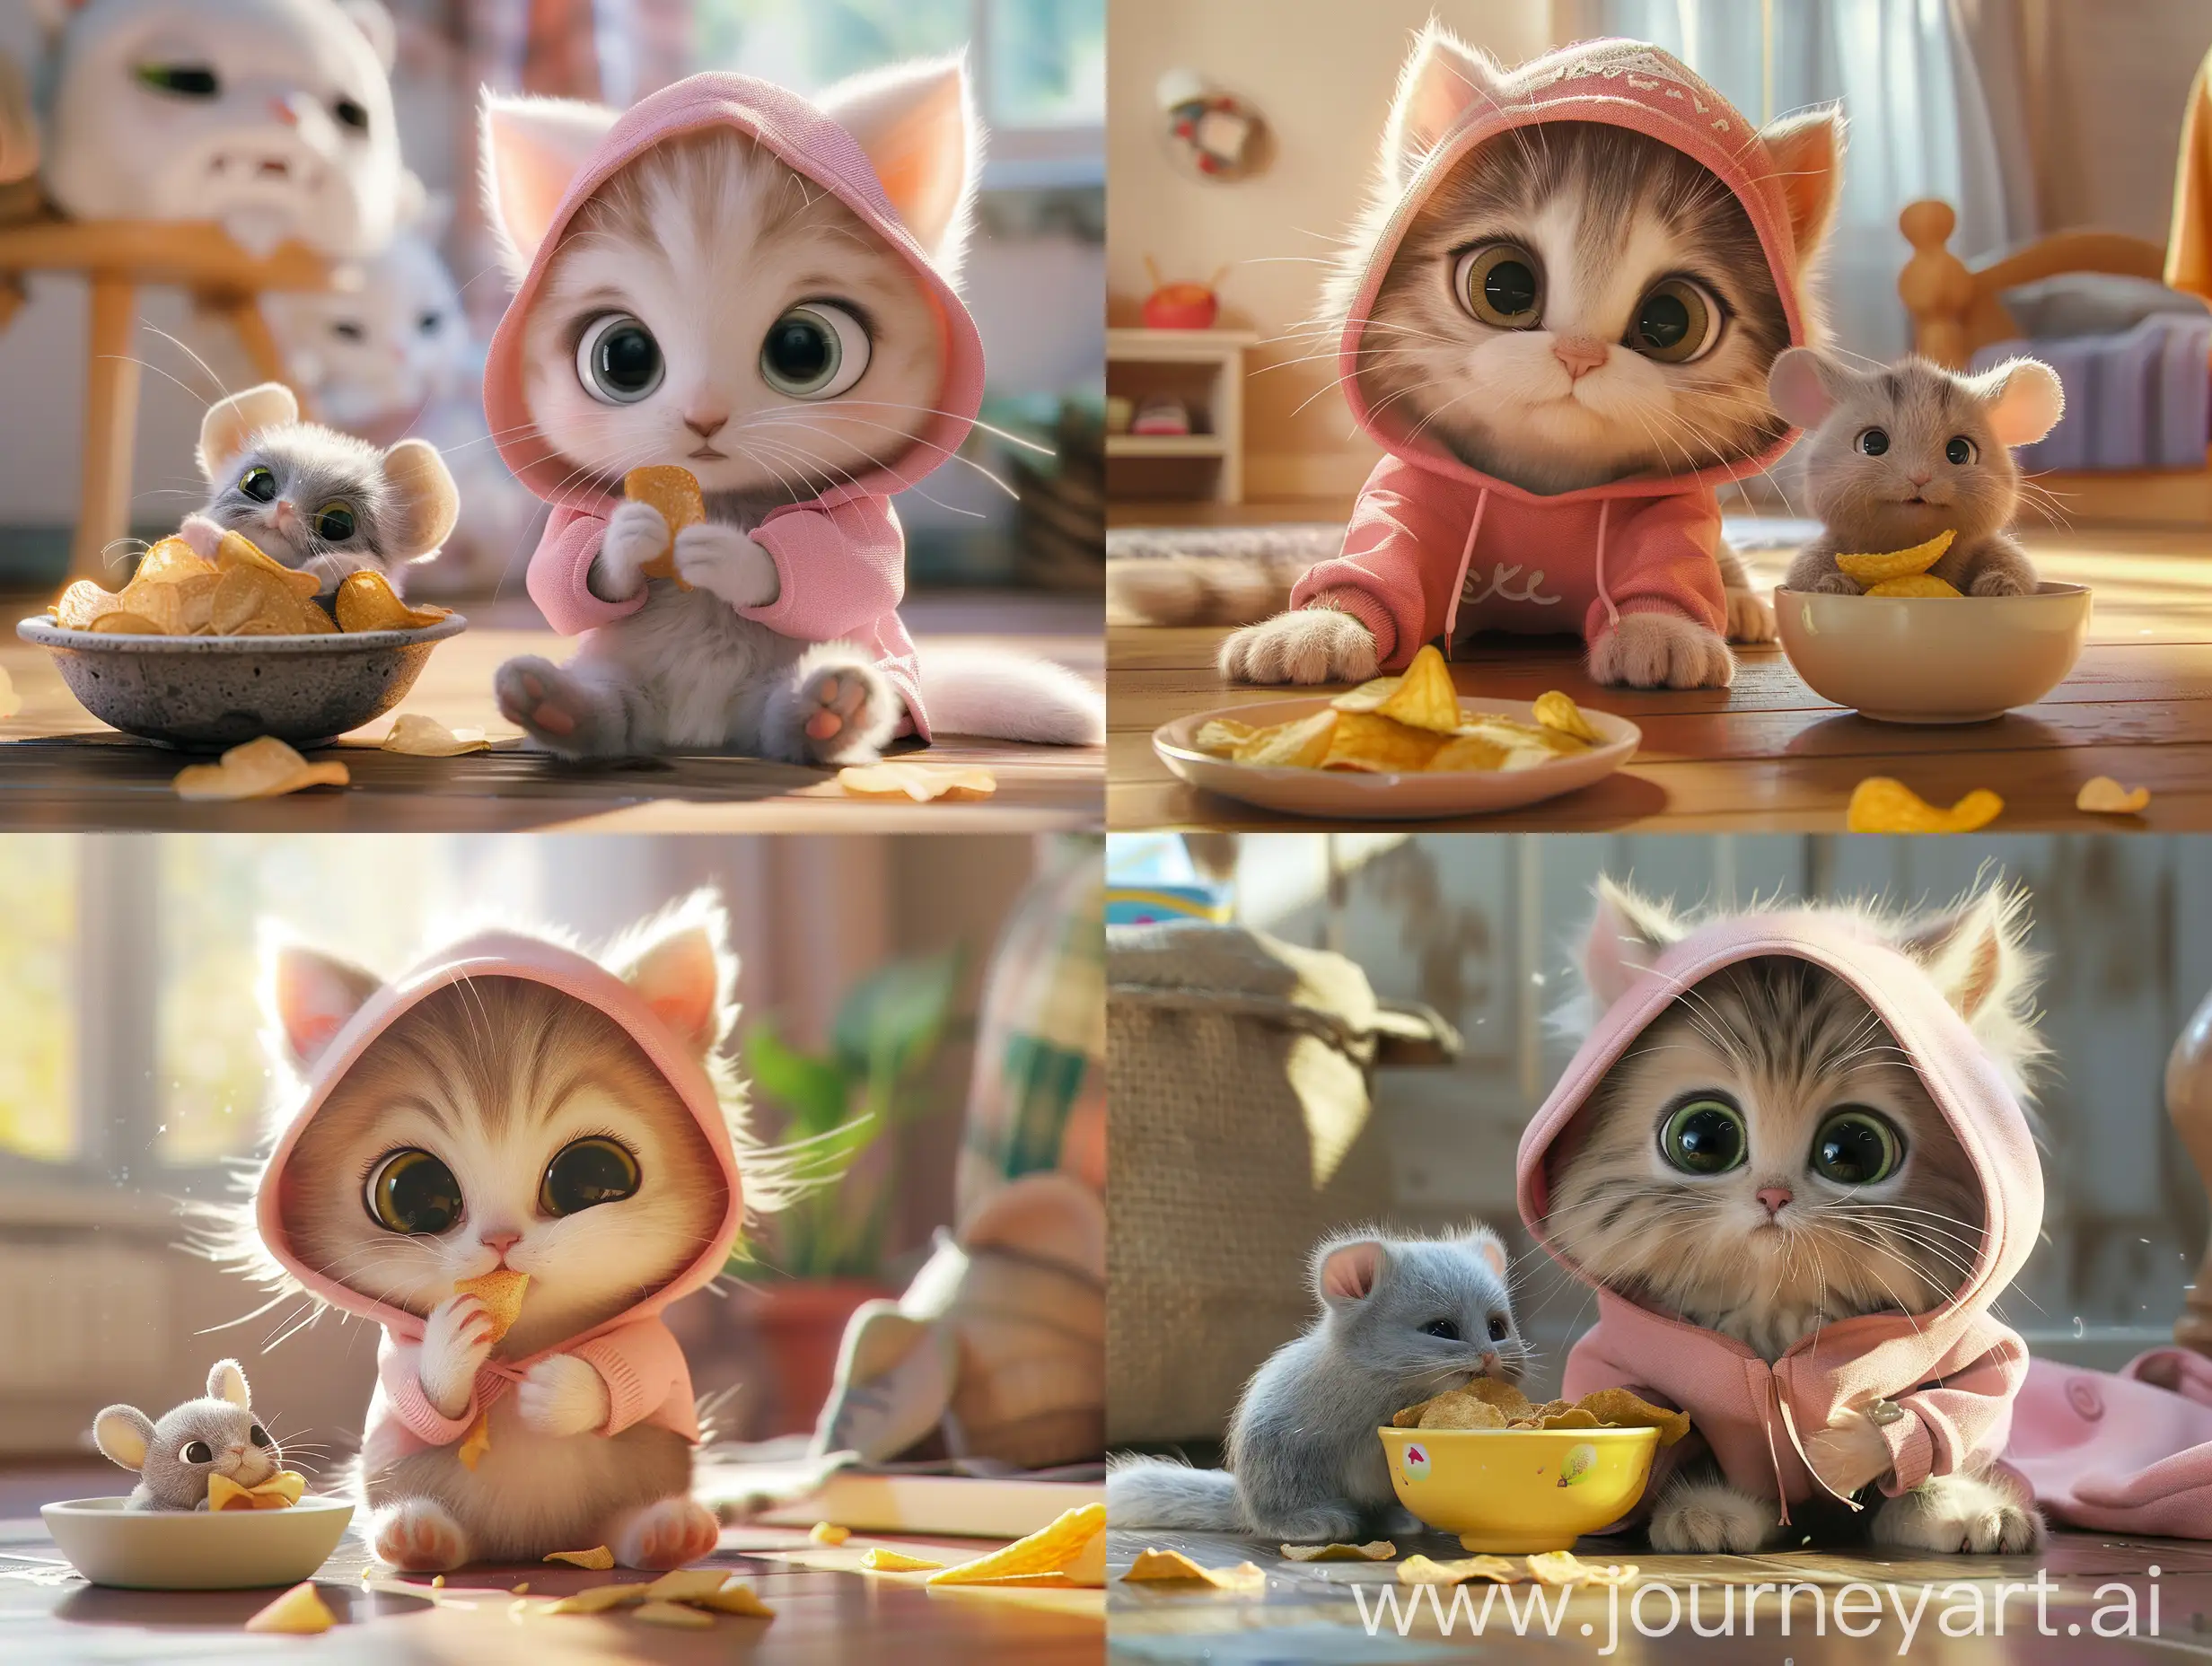 realism, cinematic, Super cute little kitten (white flur) with big expressive eyes, wears a pink hoody and shorts, sunny weather, sitting on the floor at home, hugging a fluffy grey mouse plushie,it  was eating potato chips from the bowl. very cute, warm atmosphere, Pixar studio style